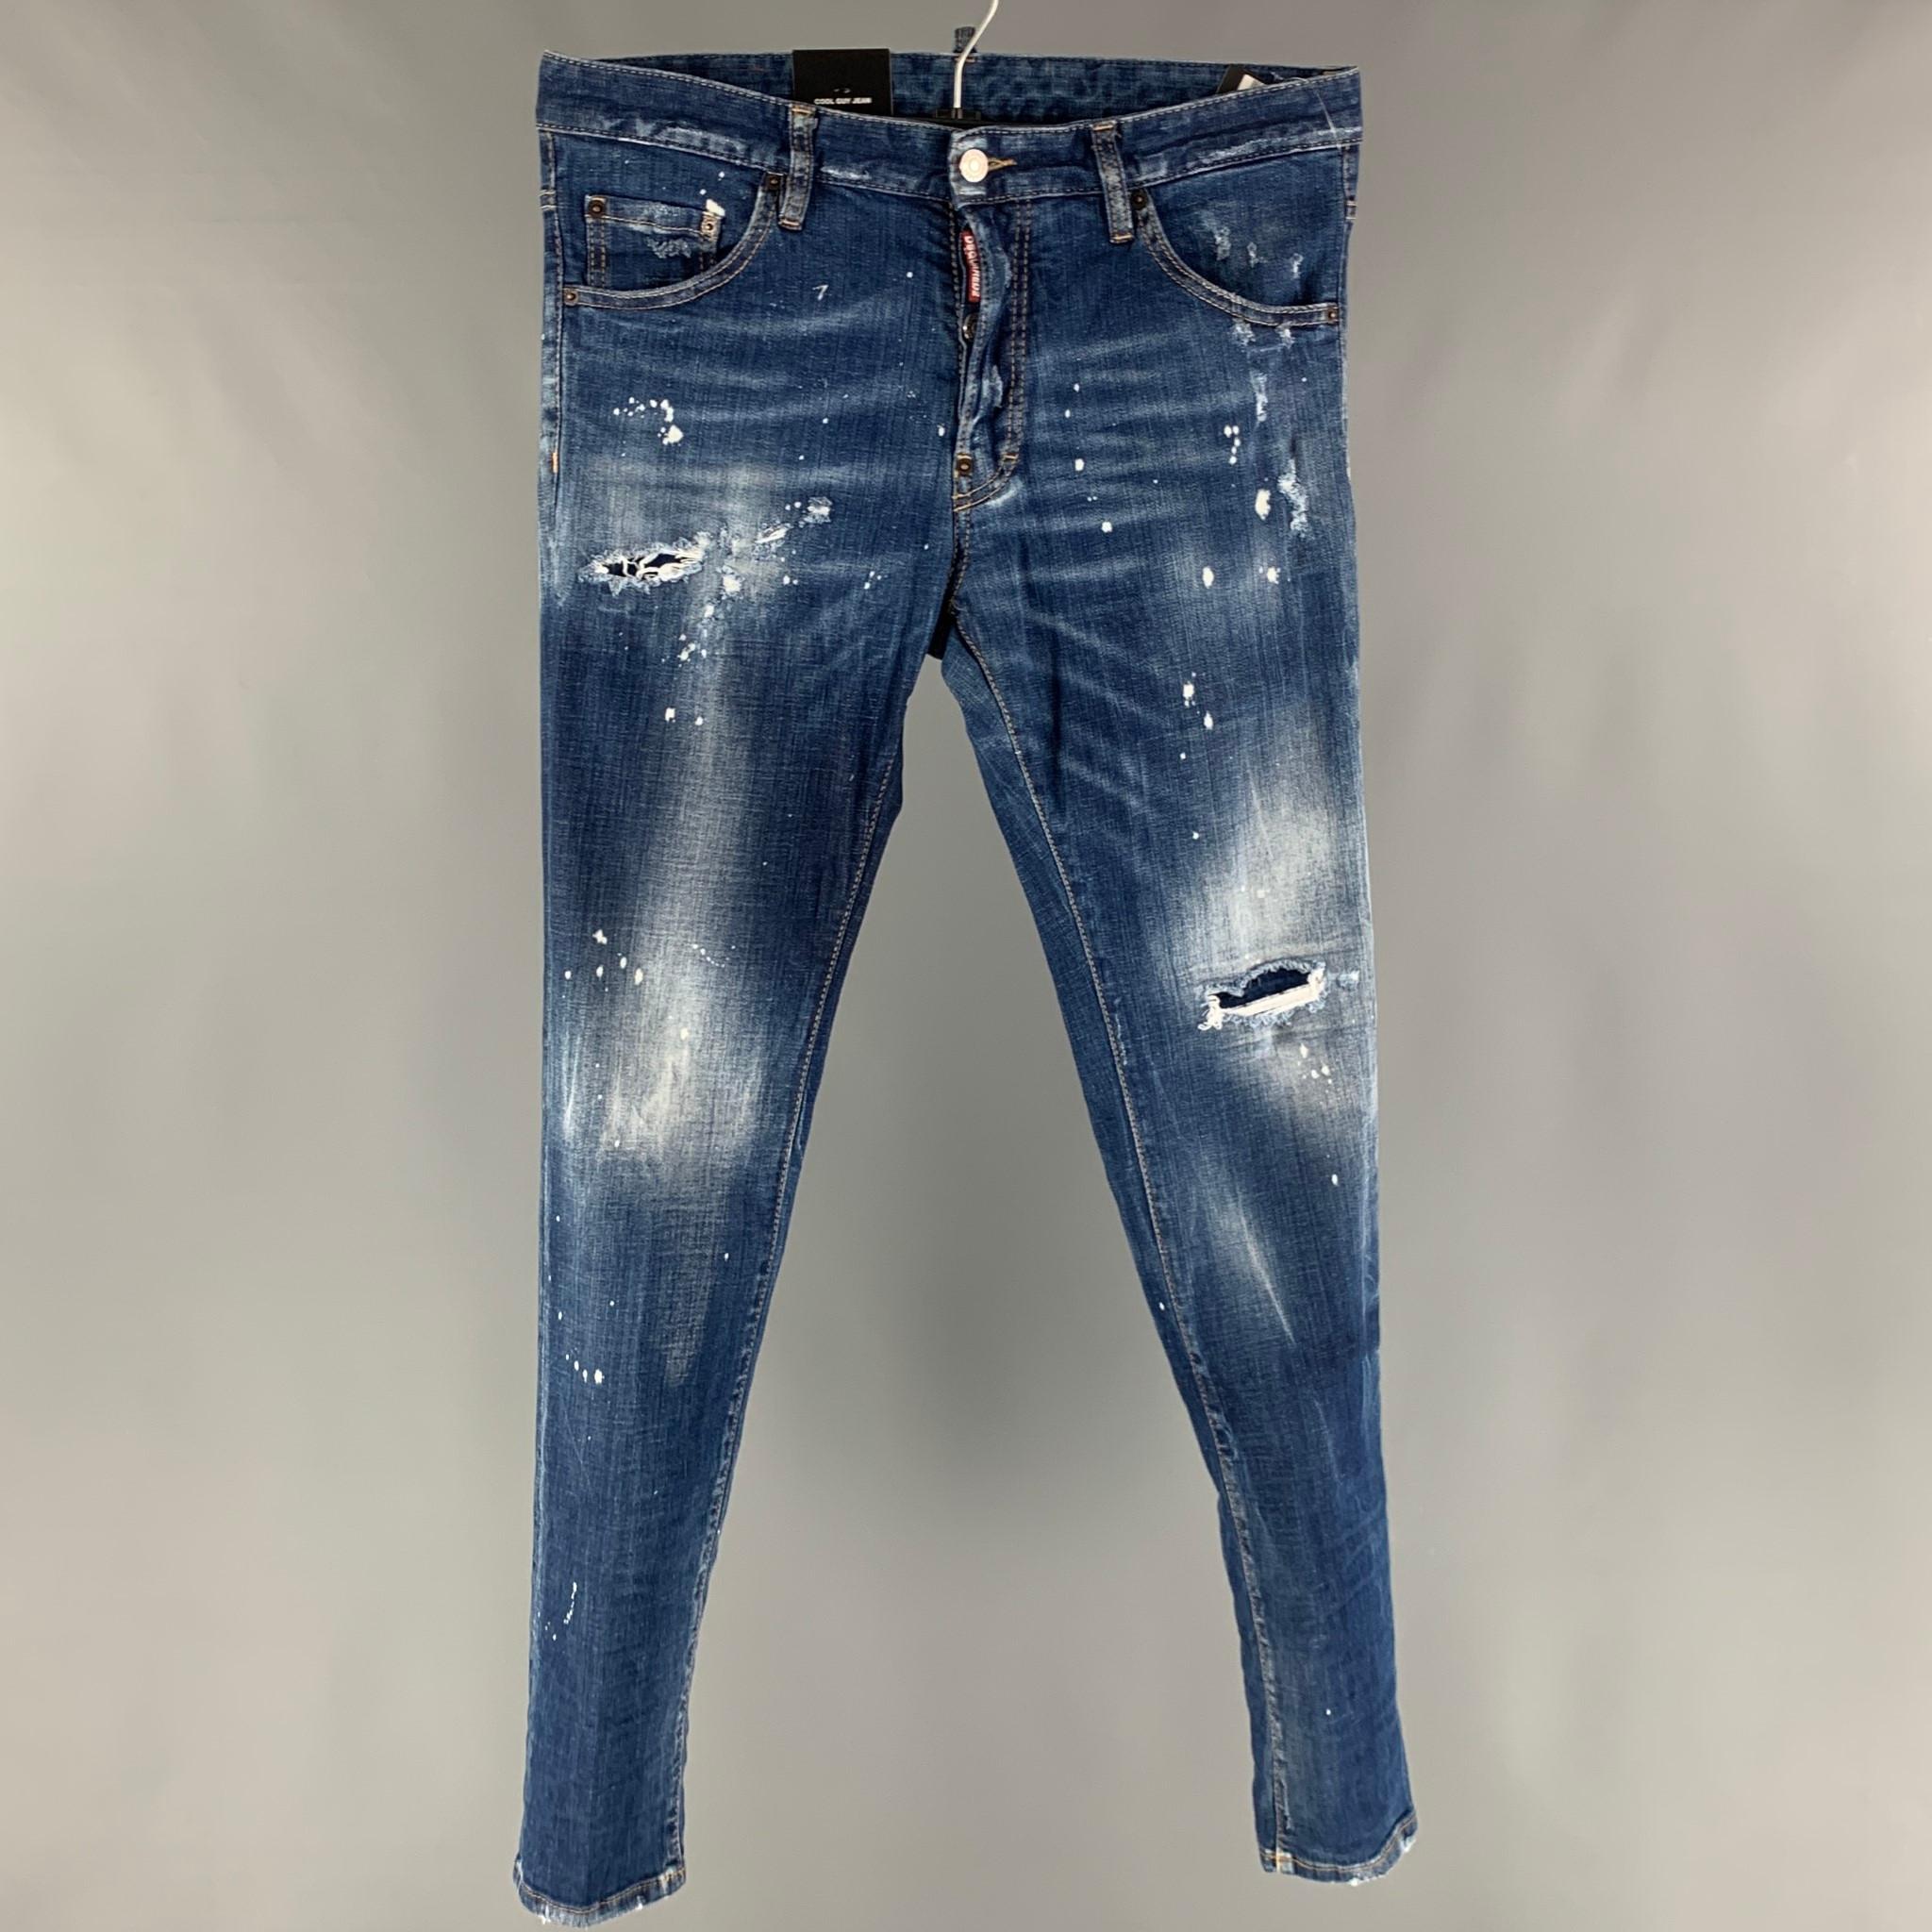 DSQUARED2 jeans comes in an indigo distressed cotton and elastane denim featuring a long crotch, paint splatter details, contrast stitching, and a button fly closure. Made in Italy.

New with Tags.
Marked: 48

Measurements:

Waist: 34 in.
Rise: 9